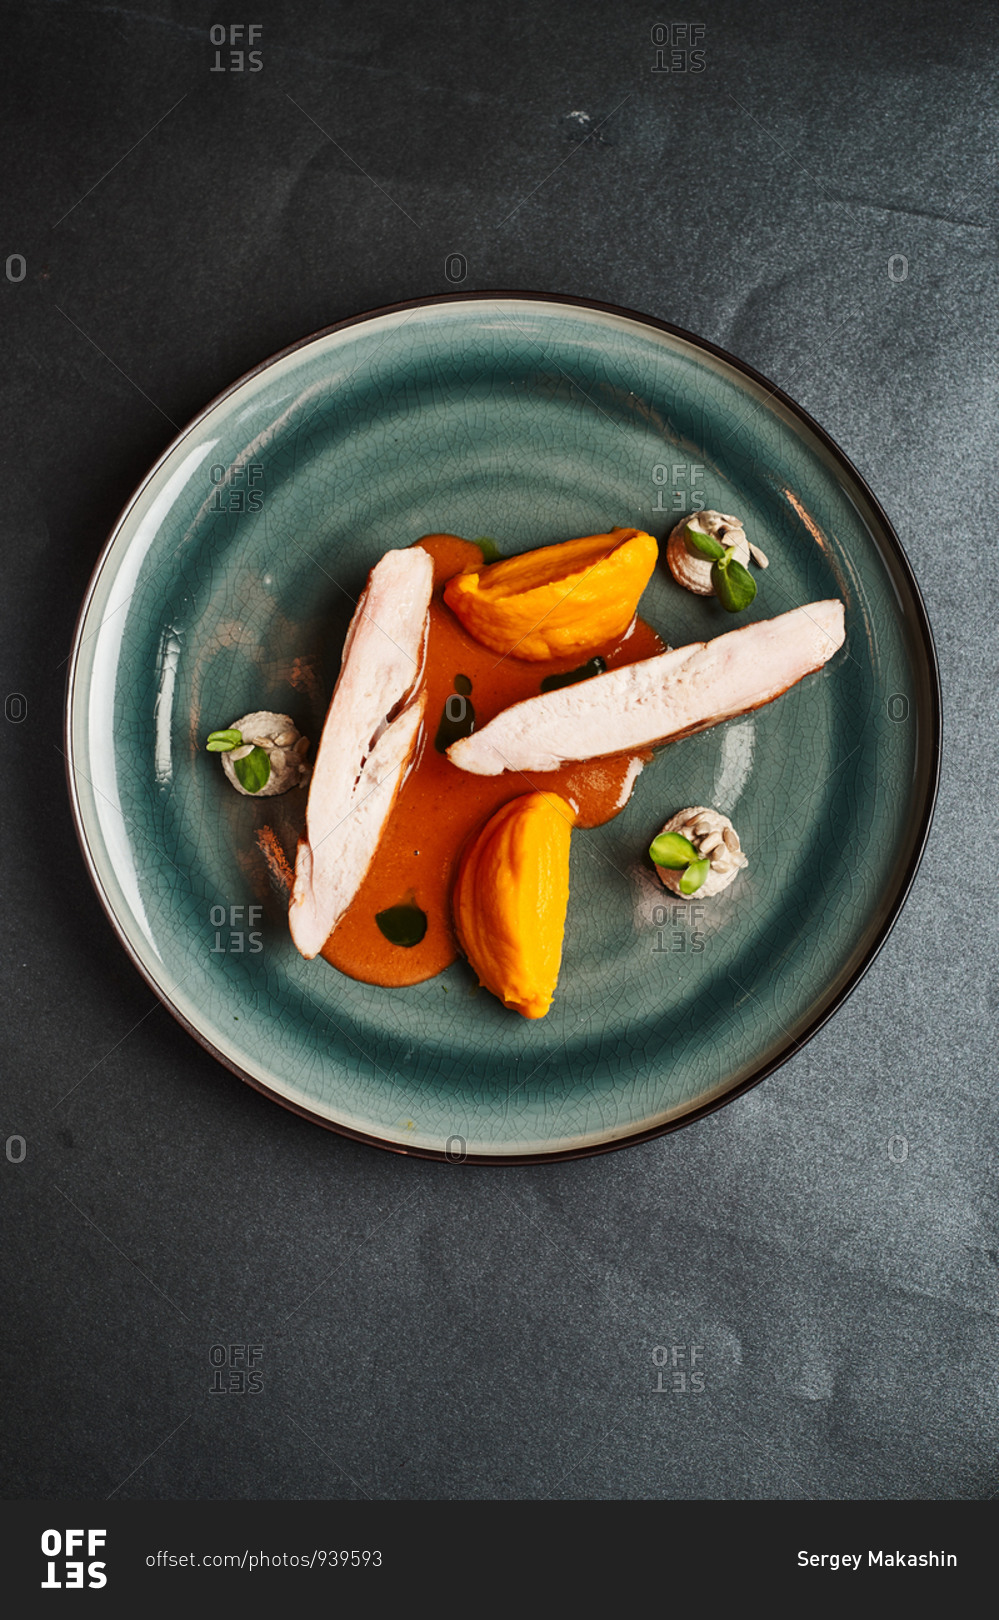 molecular pumpkin puree, tomato dishes, chicken breast with a puree of celery, sunflower seeds, greens